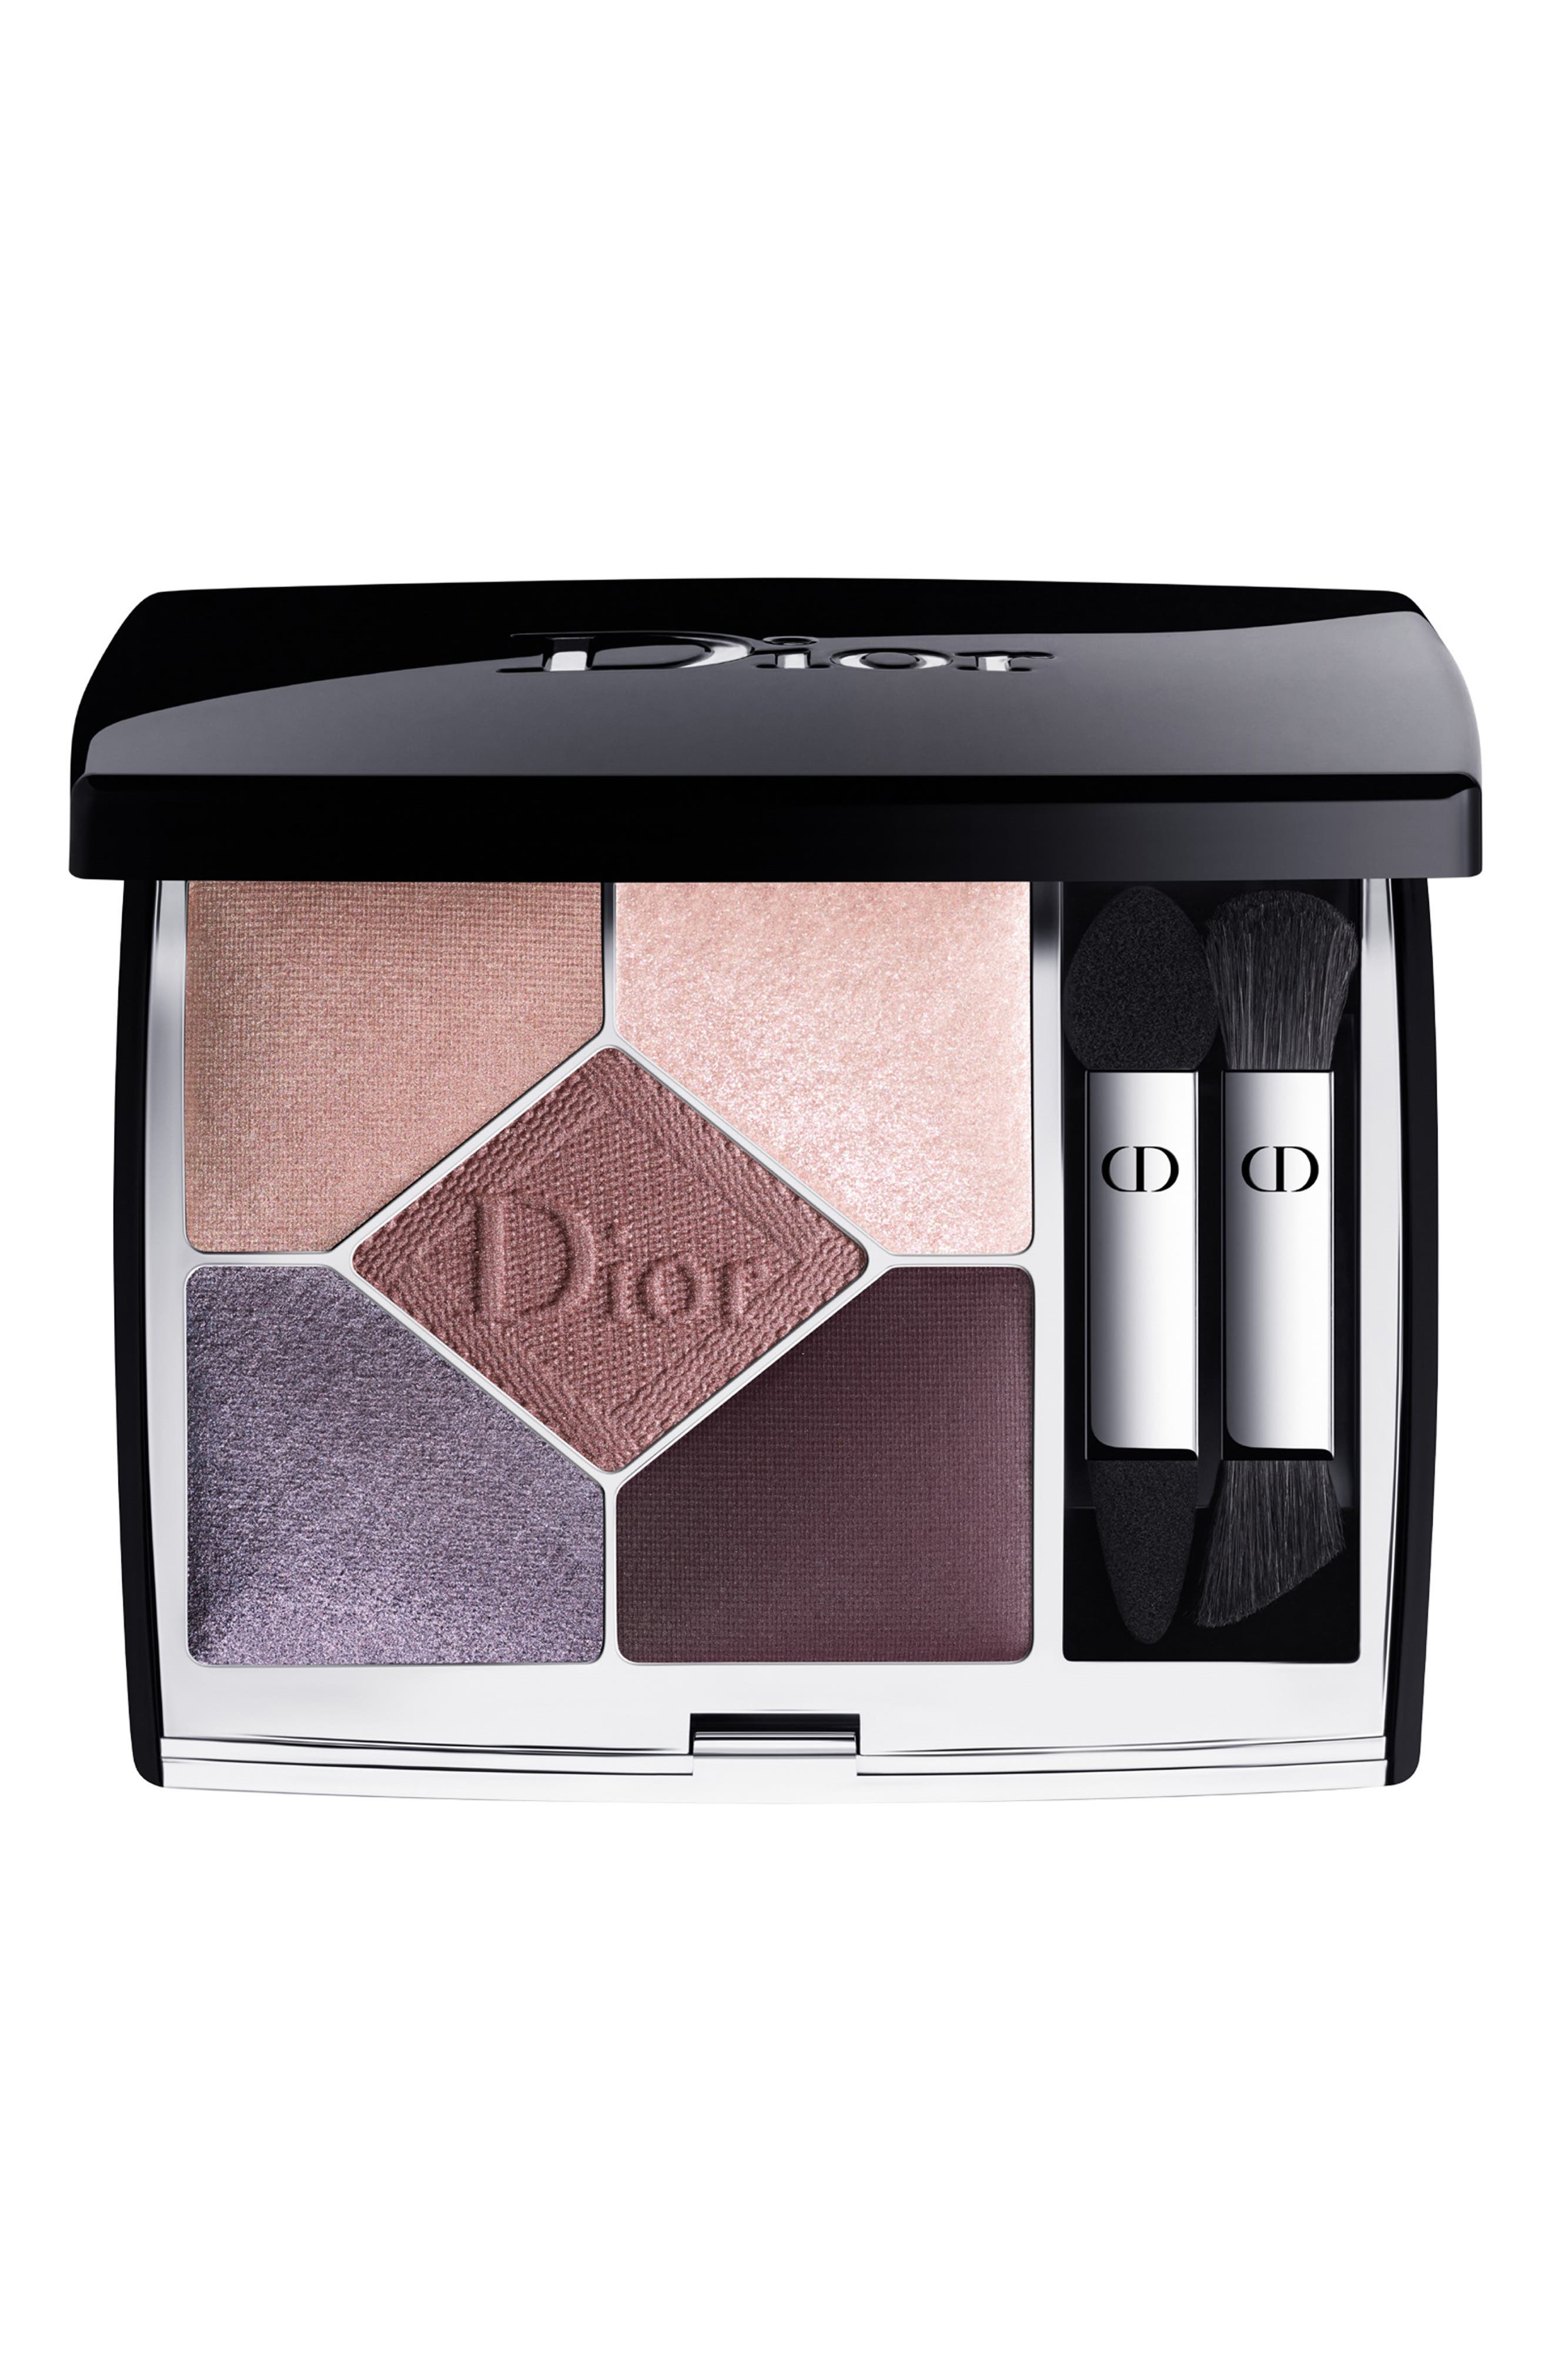 Dior 5 Couleurs Couture Eyeshadow Palette in 769 Tutu